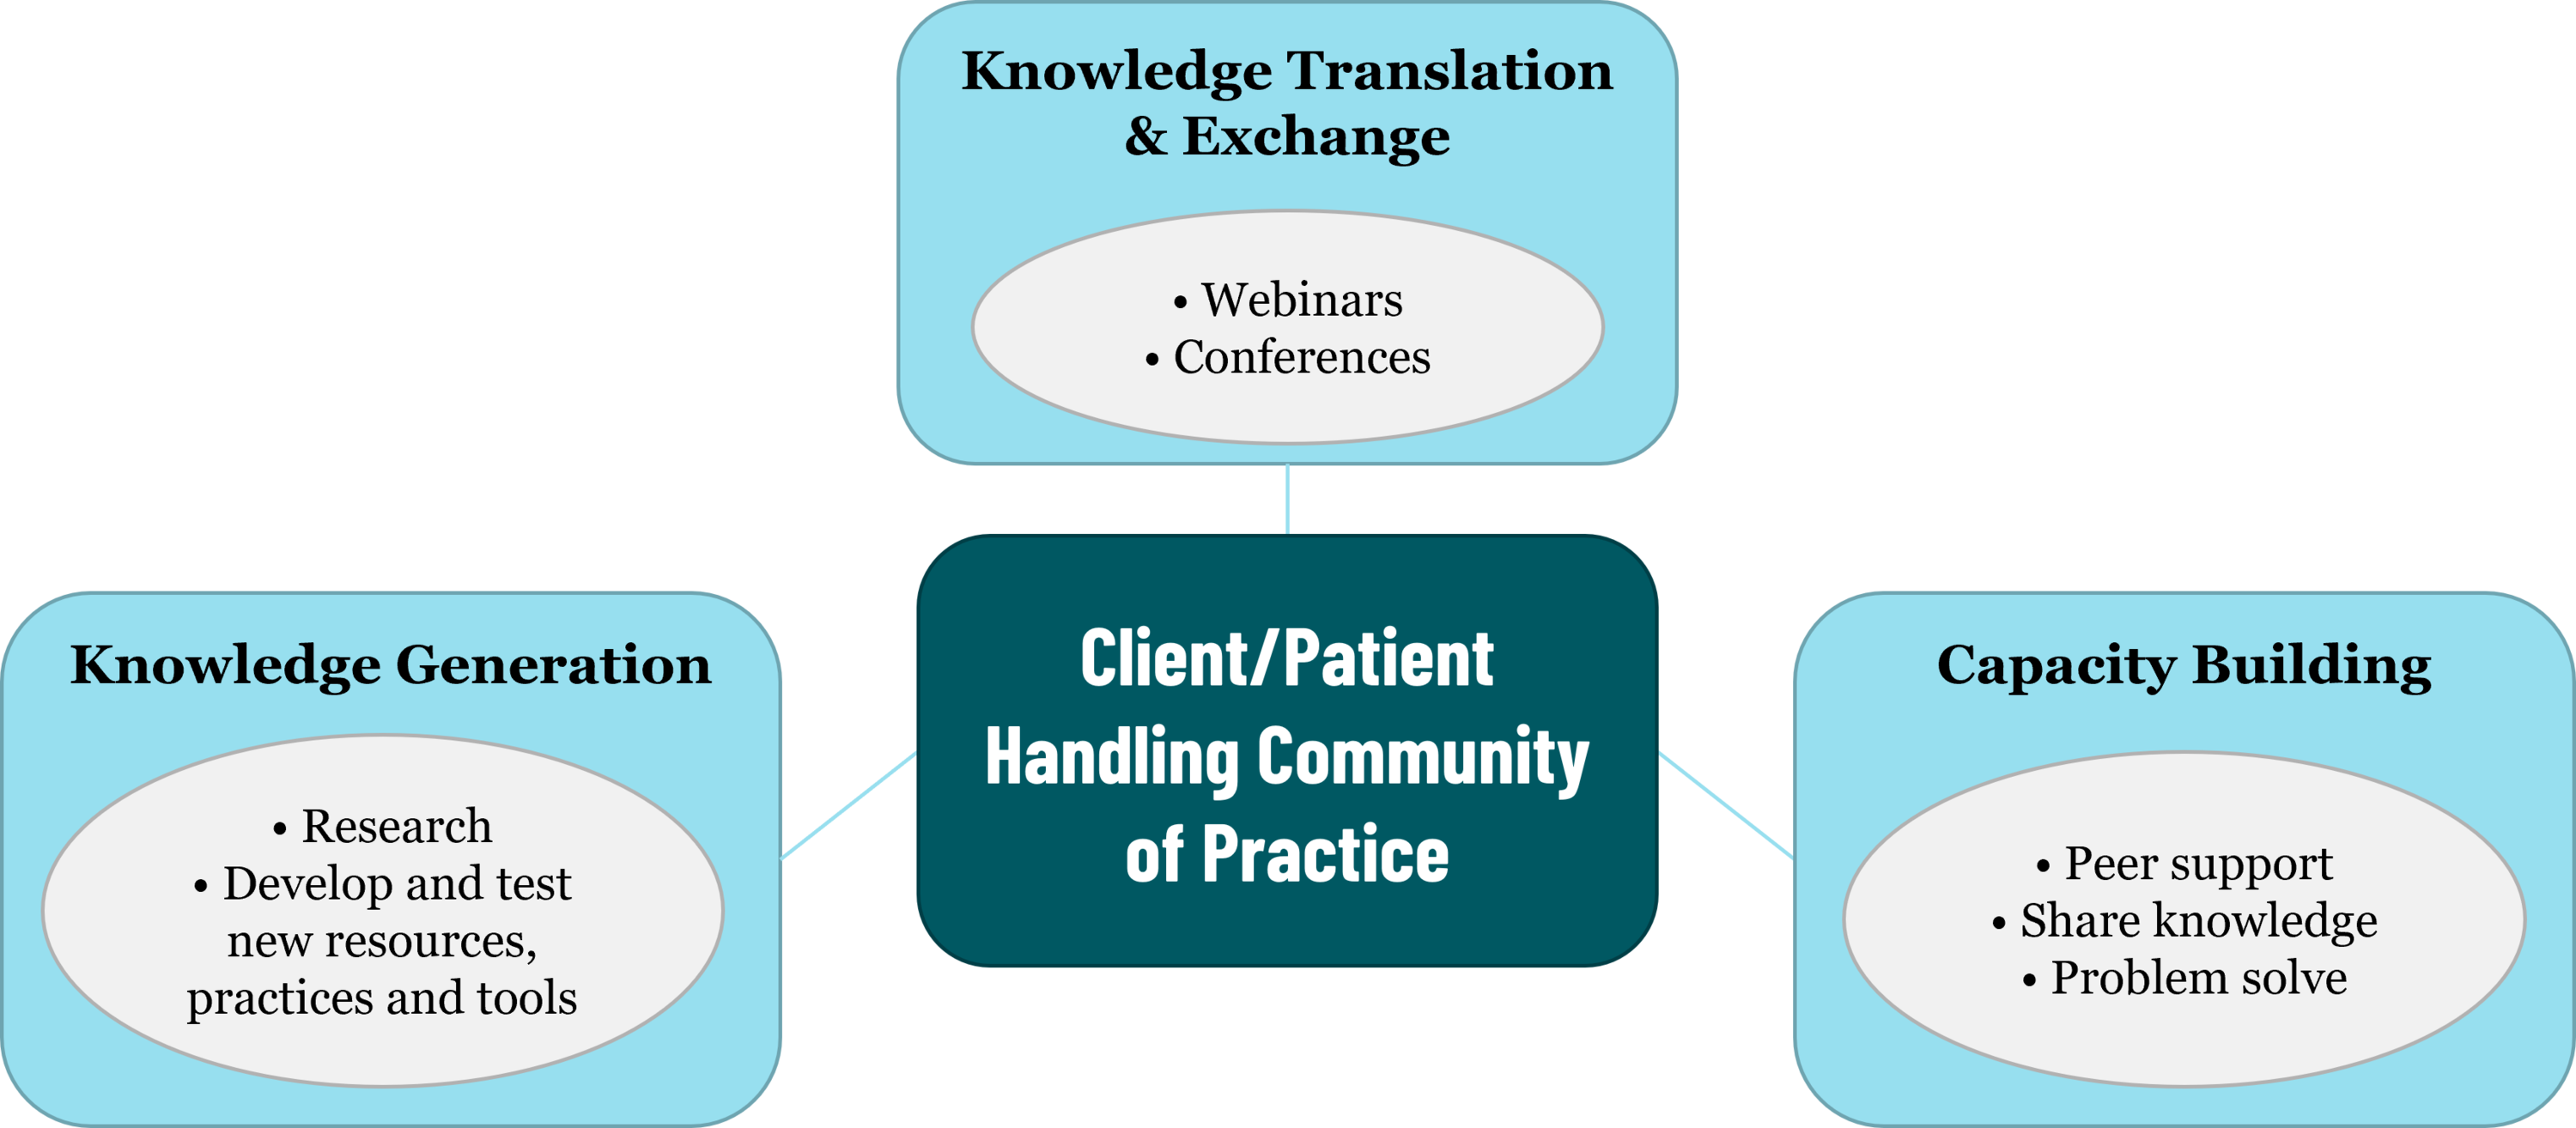 A diagram showing what the CoP offers, including: knowledge generation (through research, developing adn testing new resources, practices, and tools); knowlege translation & exchange (thorugh webinars and conferences); and capacity building (thorugh peer support, knowledge sharing, and problem solving)